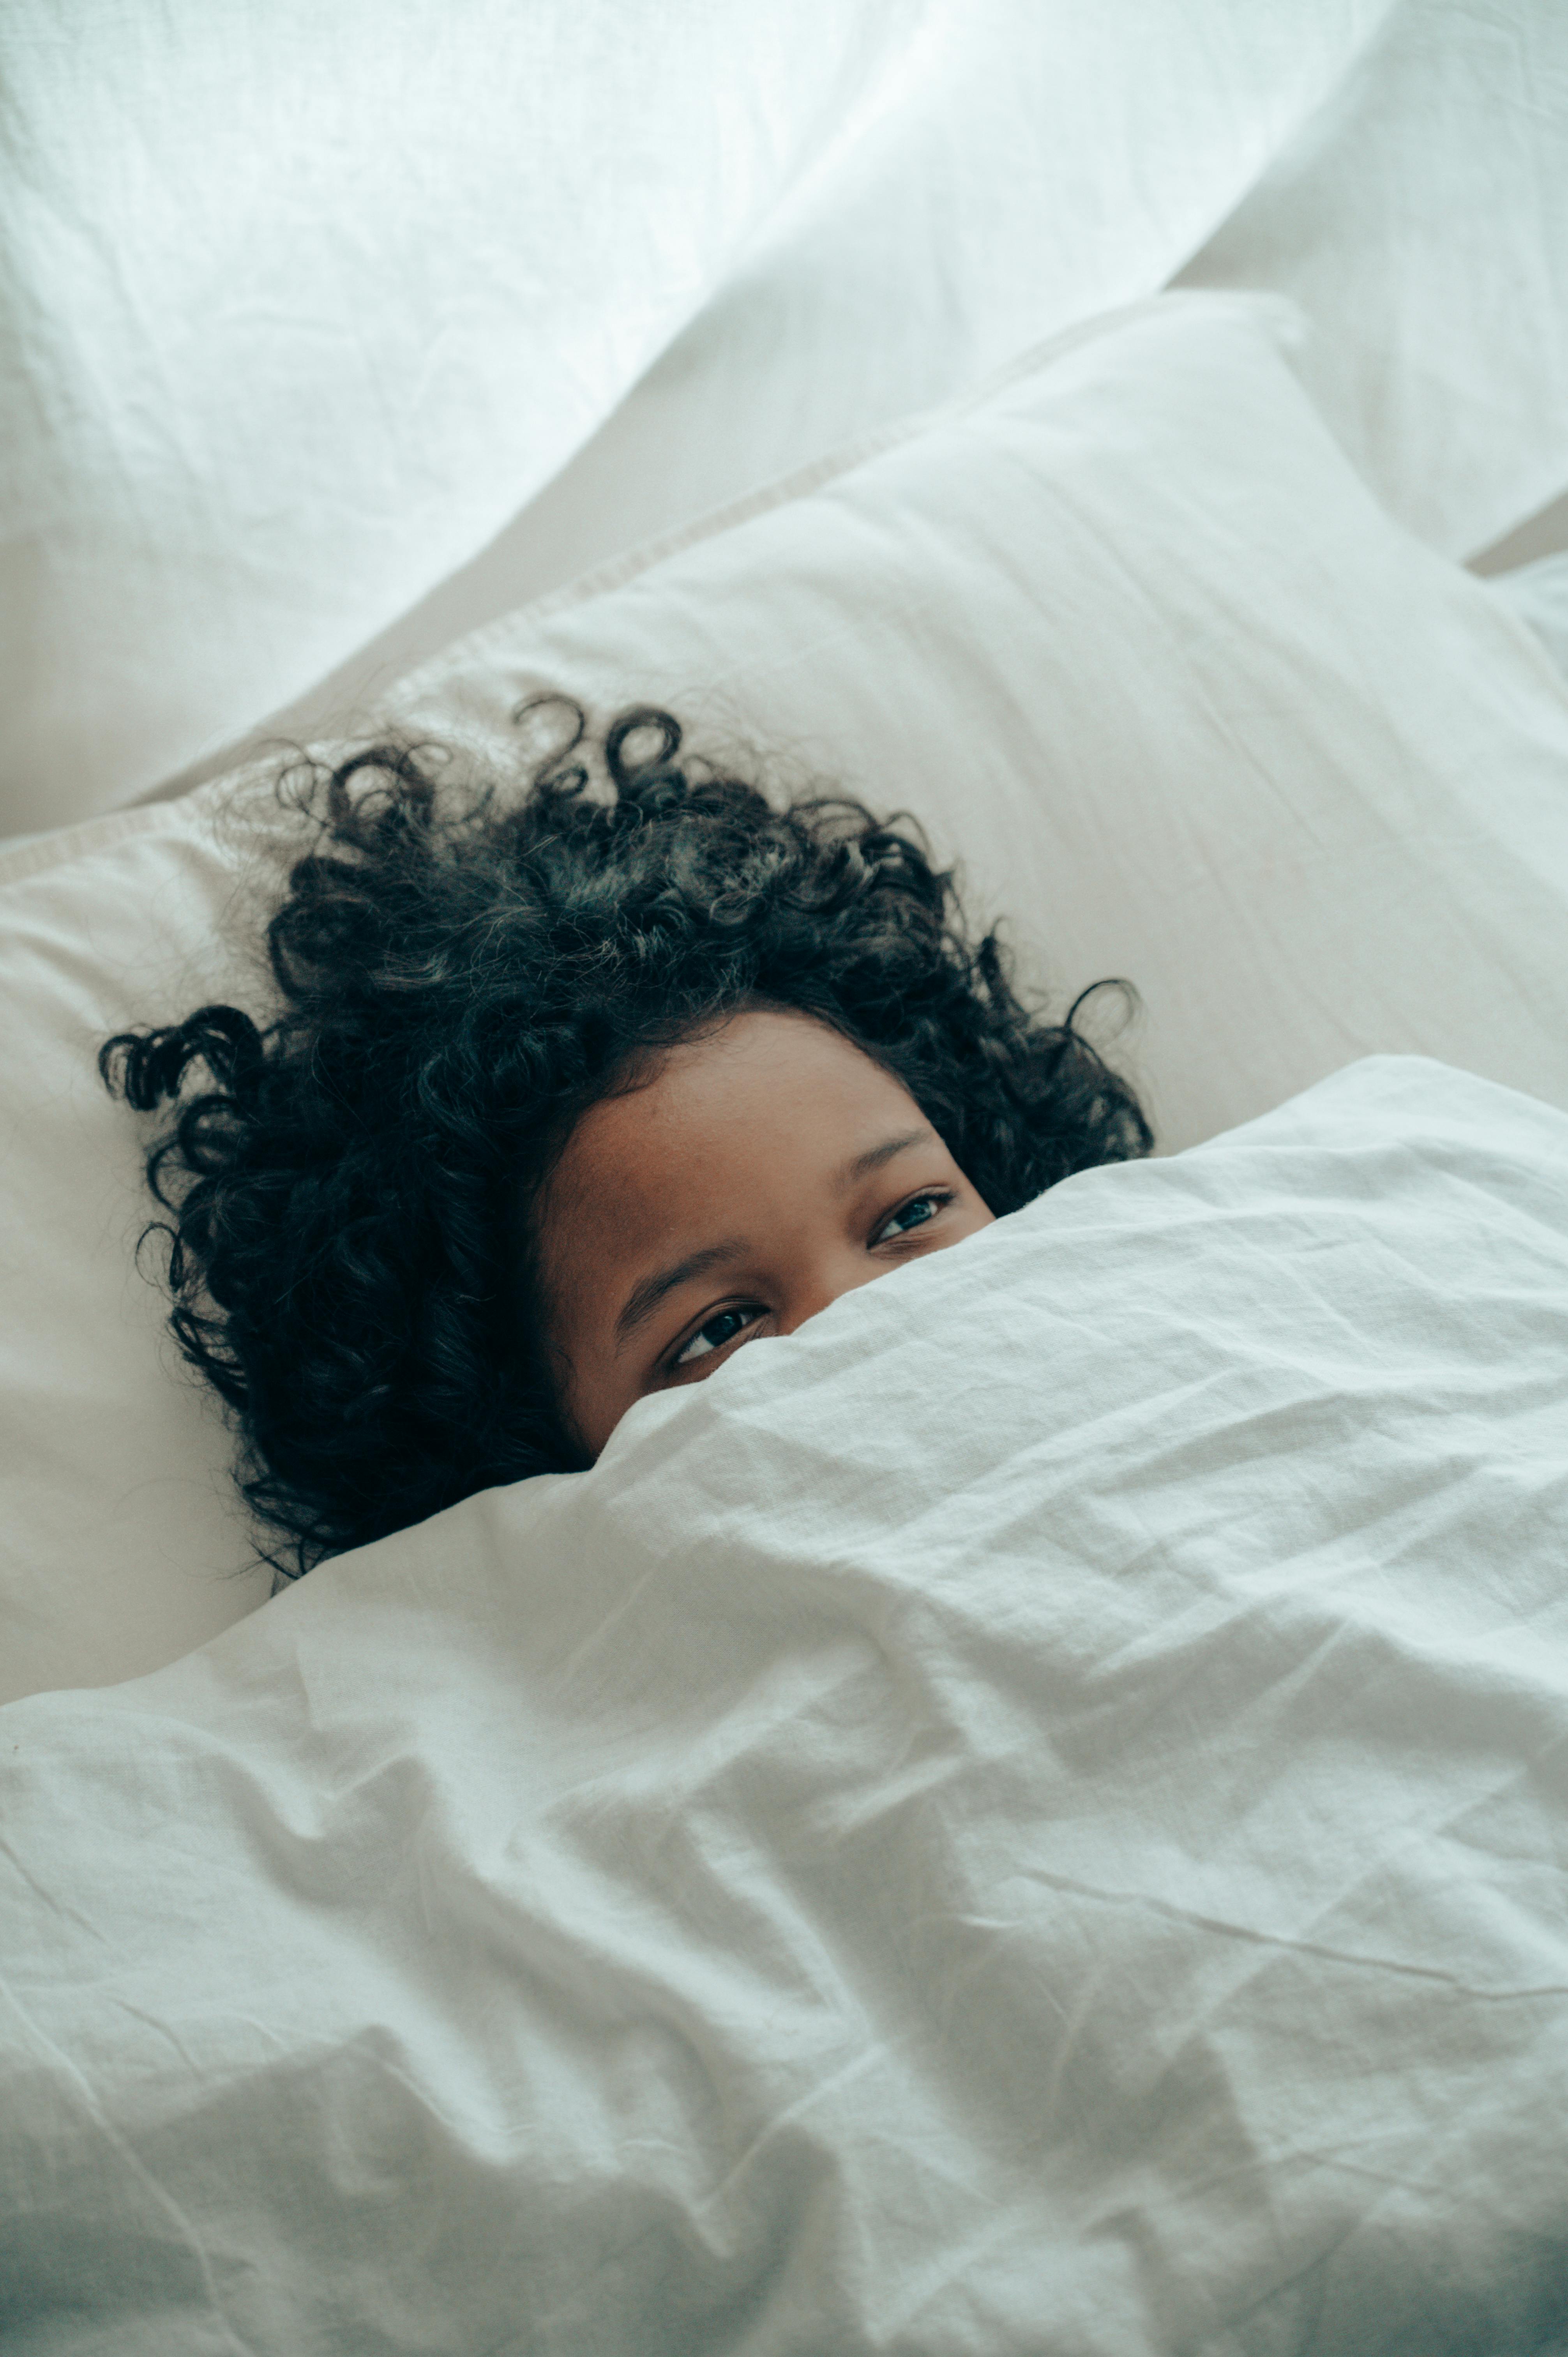 ethnic child covering half of face with blanket lying in bed